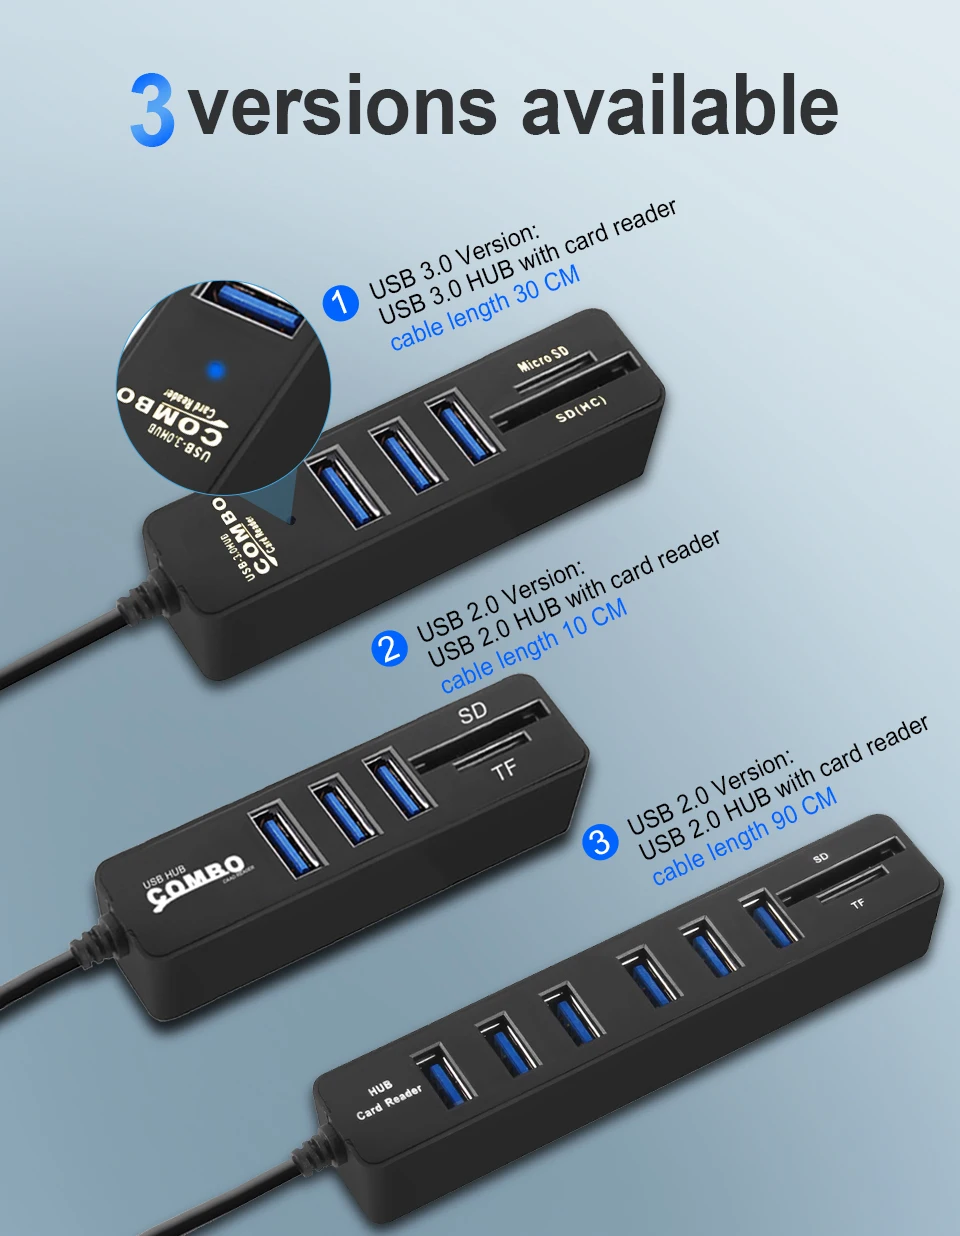 High-Speed Data Transmission Hub Compatible with Mac OS,Windows 7/8/10,Google Chrome OS and More 5-Port USB Docking Station with 1 USB 3.0 Ports and 1 USB 2.0 Ports DFCHT USB Hub 3.0